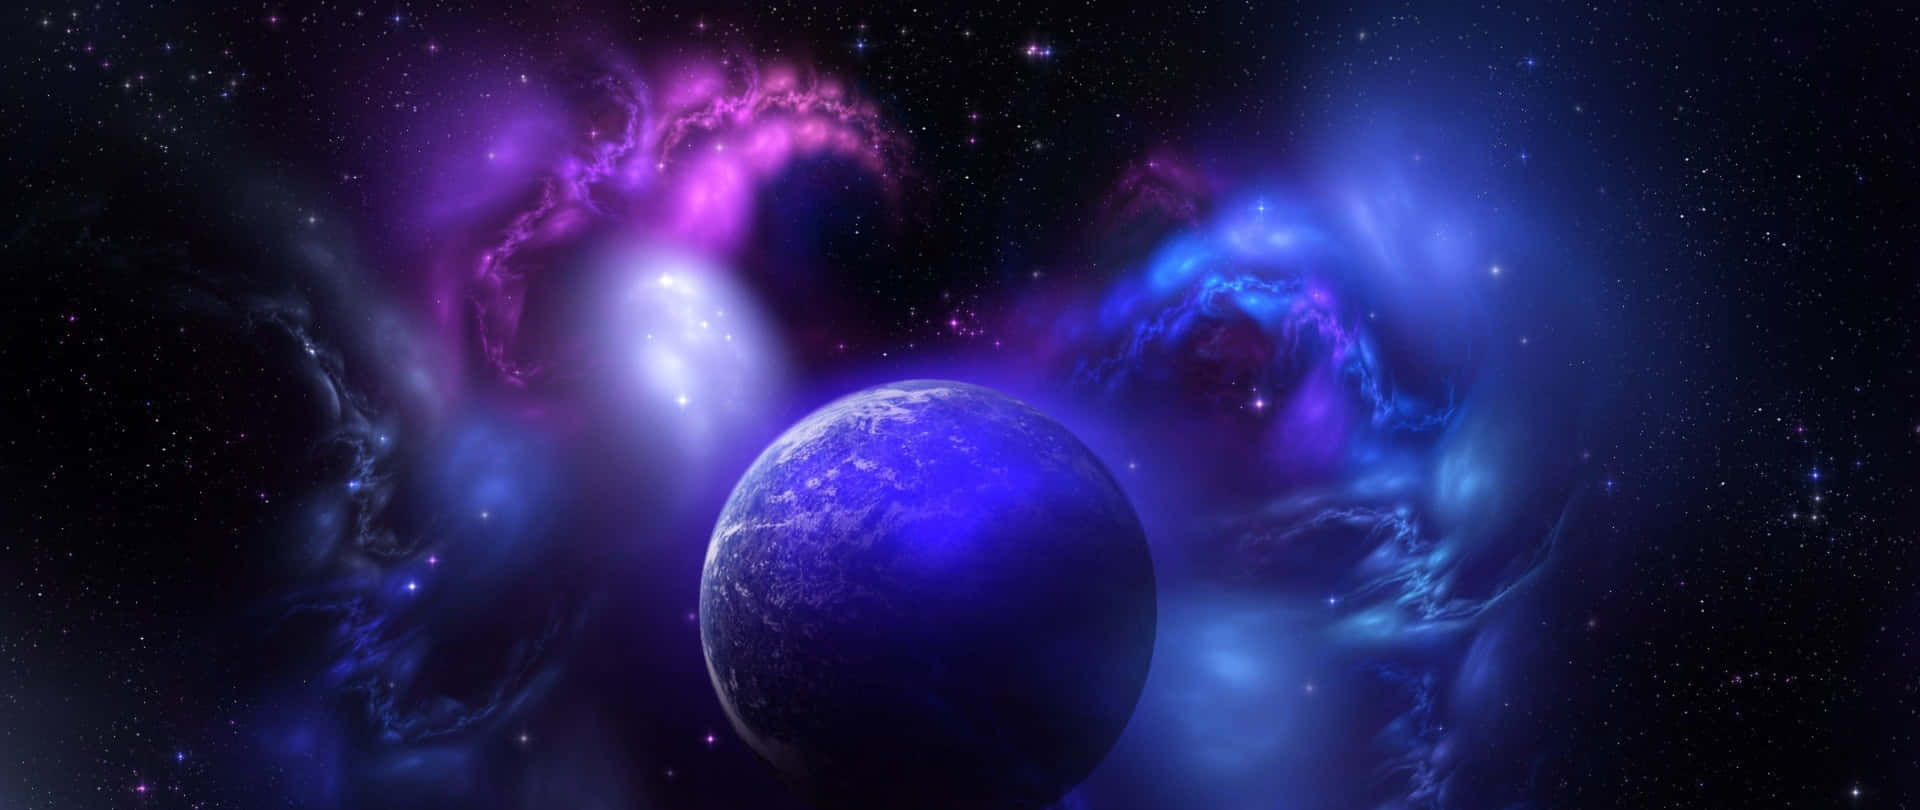 "Take a journey and explore the vibrant shades of the black and purple galaxy." Wallpaper